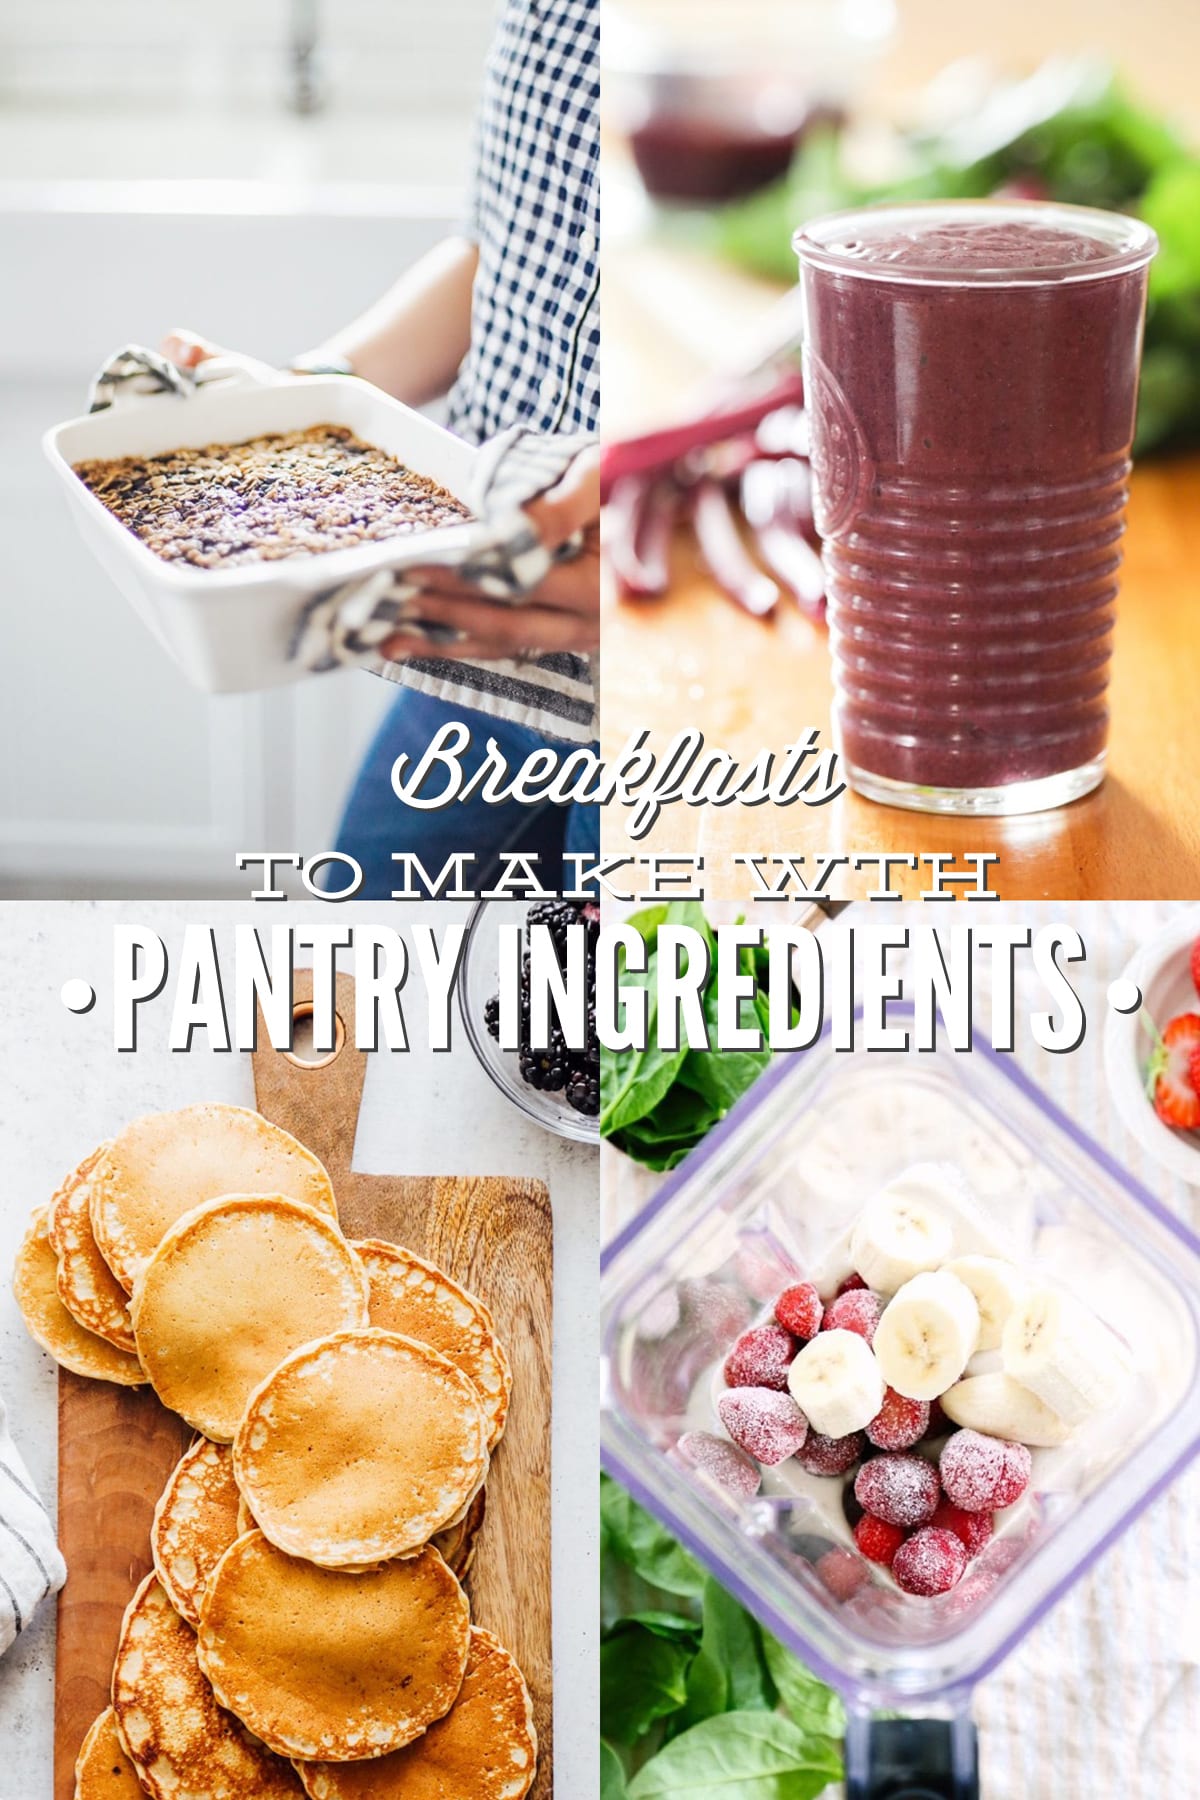 Pantry Breakfast Ideas: What to Stock and Make From Your Pantry